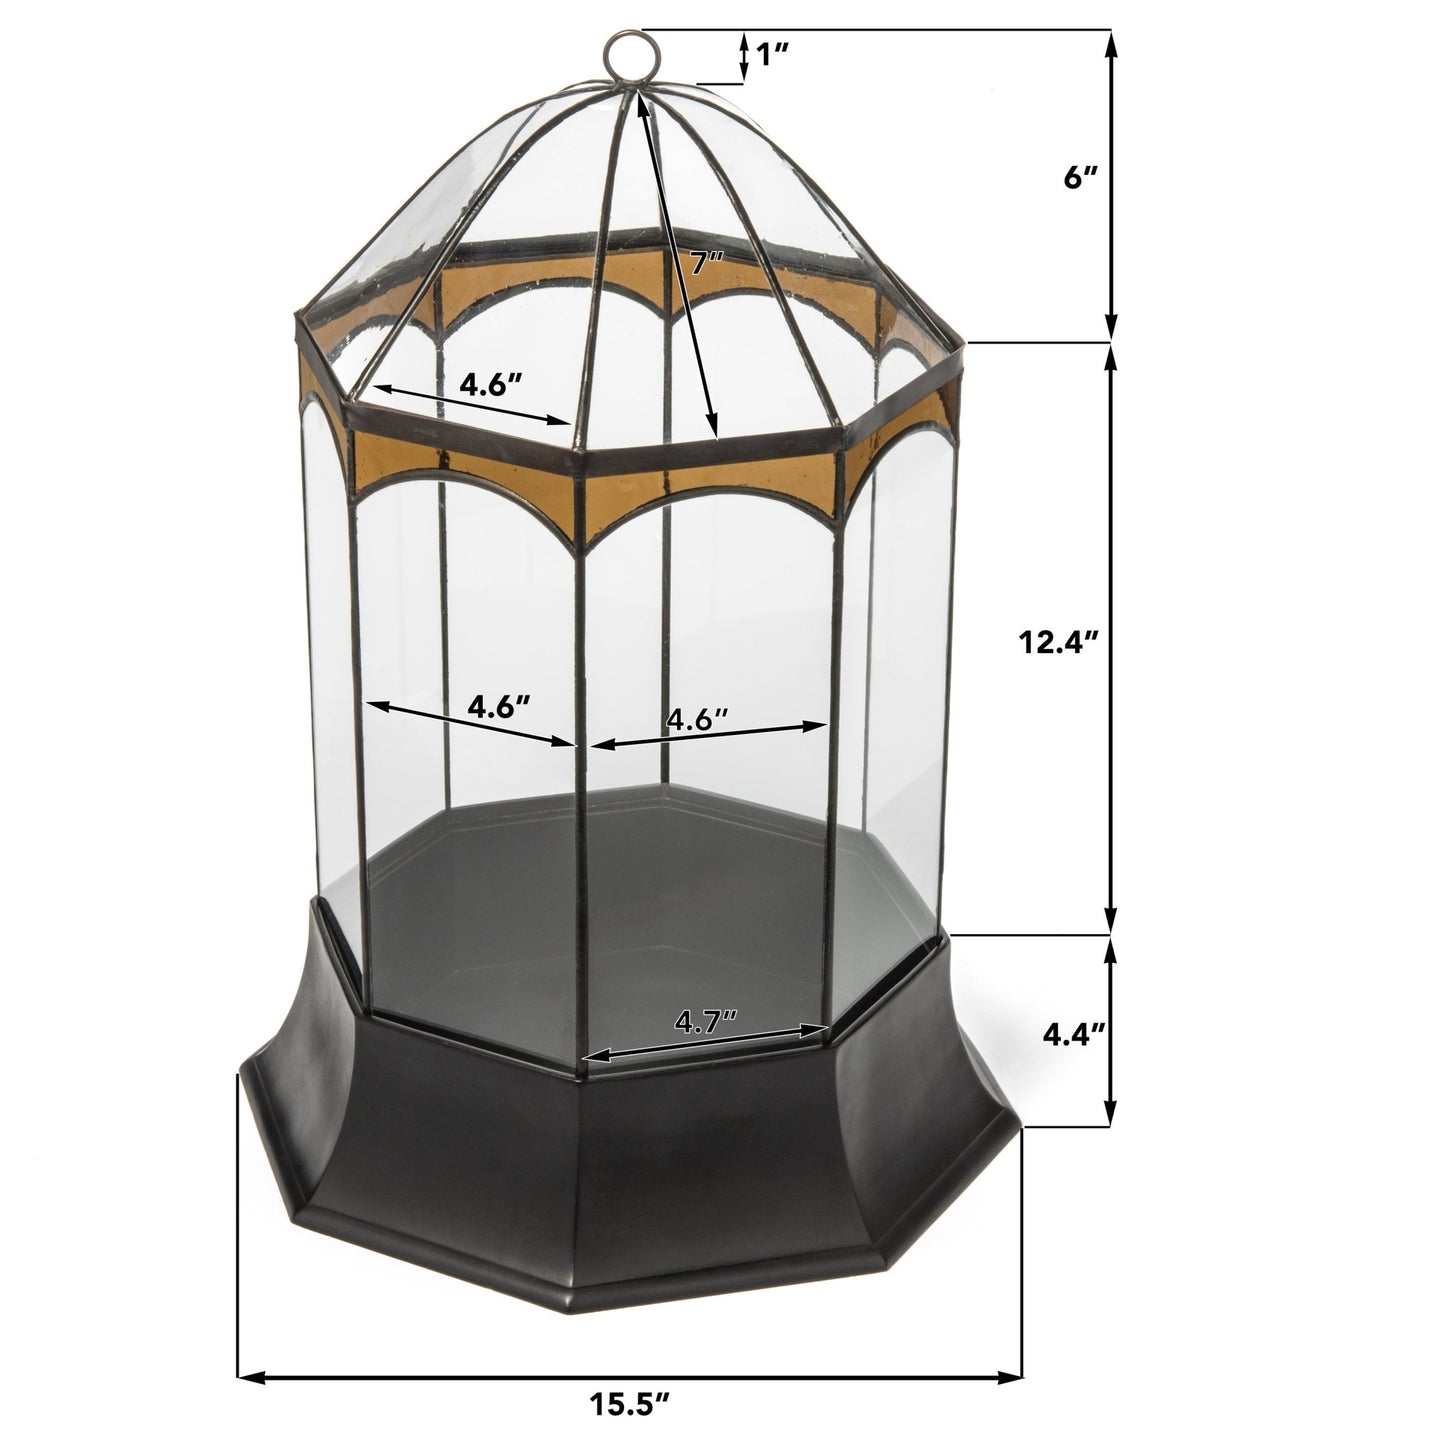 H Potter Eight Sided Terrarium Wardian Case with Curved Glass and Brown Accents Large